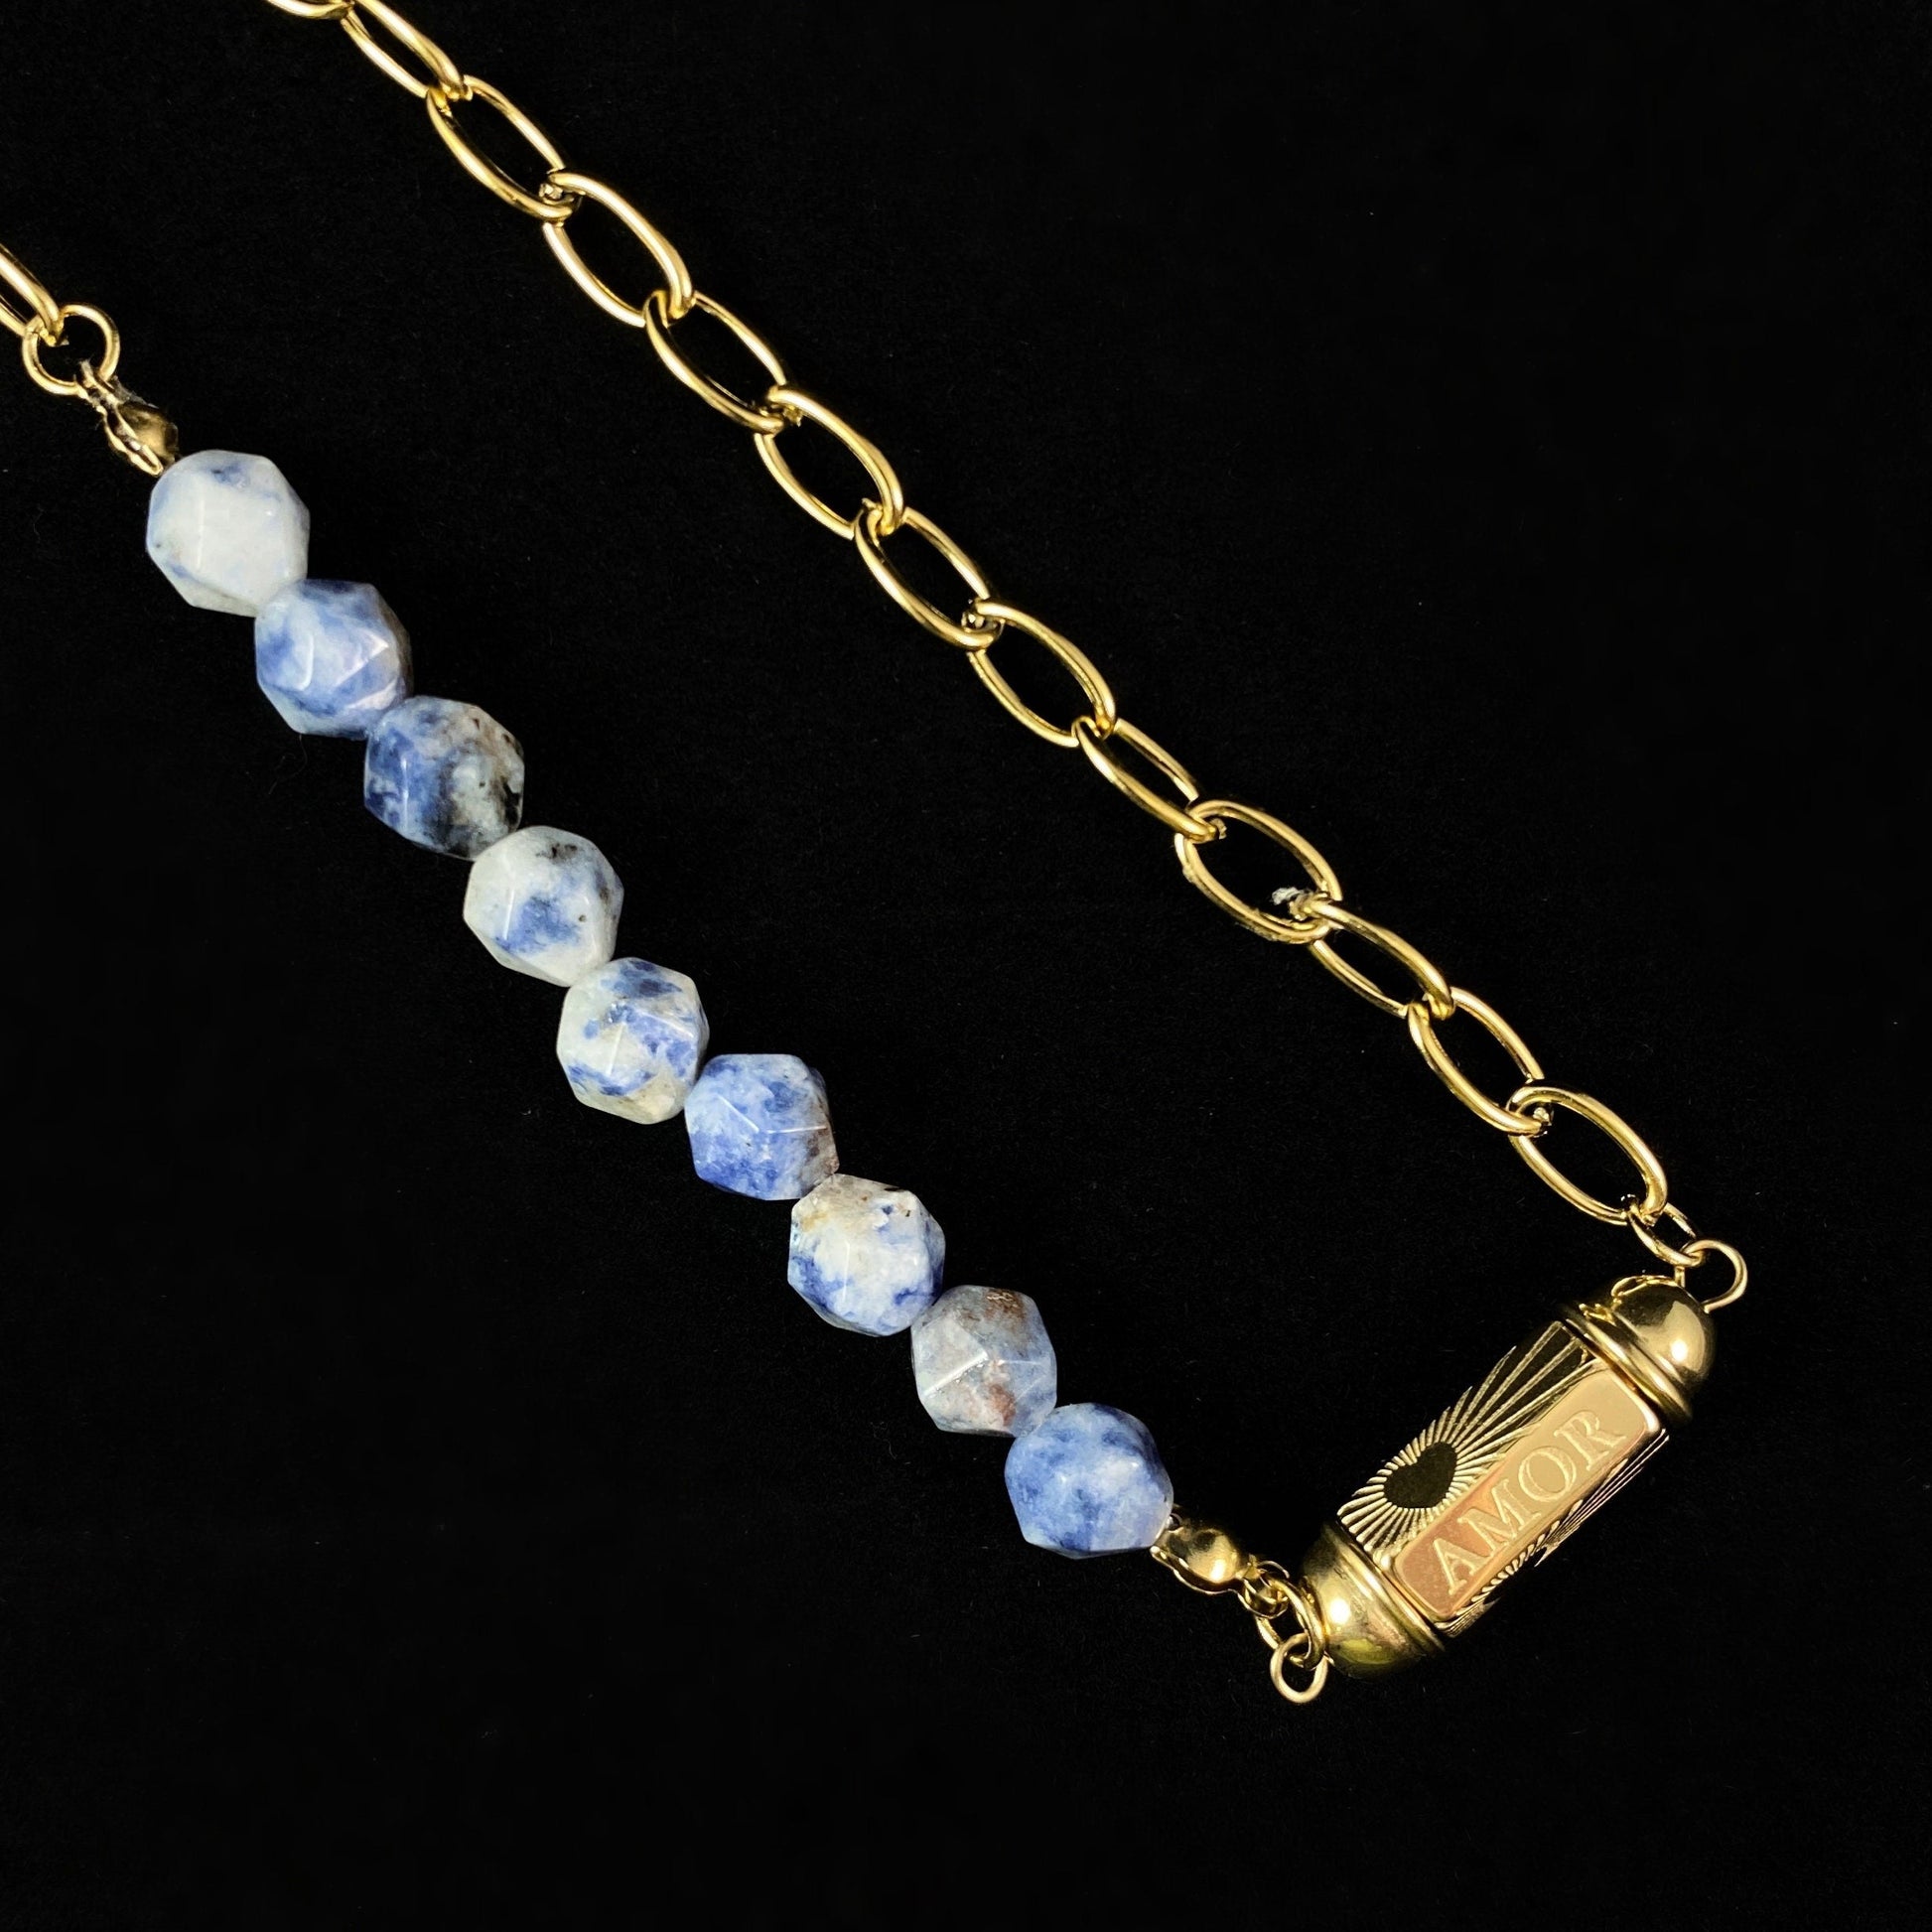 Blue Natural Stone Necklace with Love/Amor Calligraphy and Dainty Gold Heart Detailing